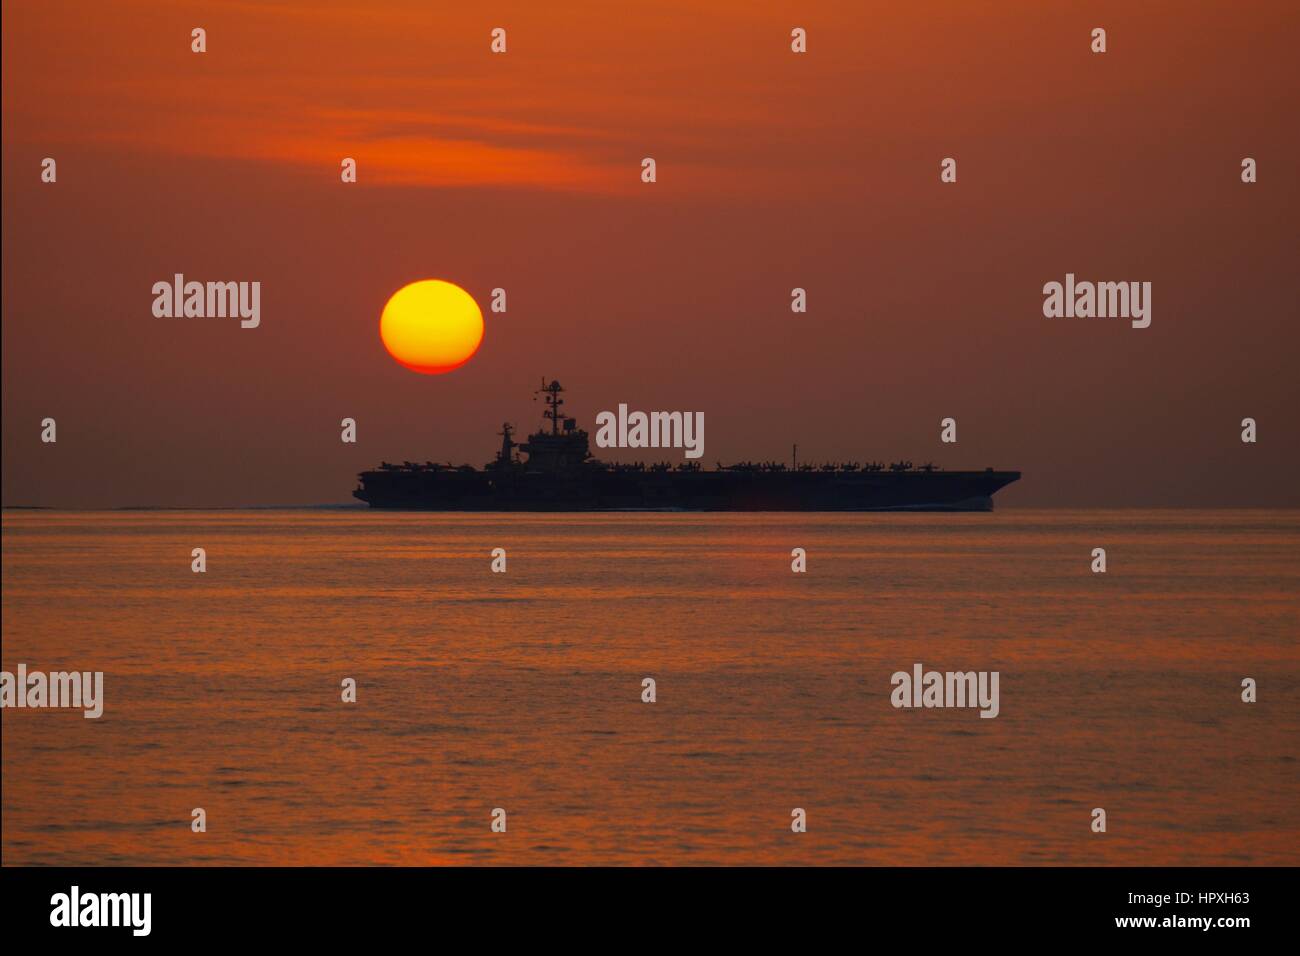 The Nimitz-class aircraft carrier USS John C Stennis operates in the Arabian Sea during sunset, Arabian Sea, January 5, 2012. Image courtesy of US Navy Yeoman 3rd Class James Stahl. Stock Photo